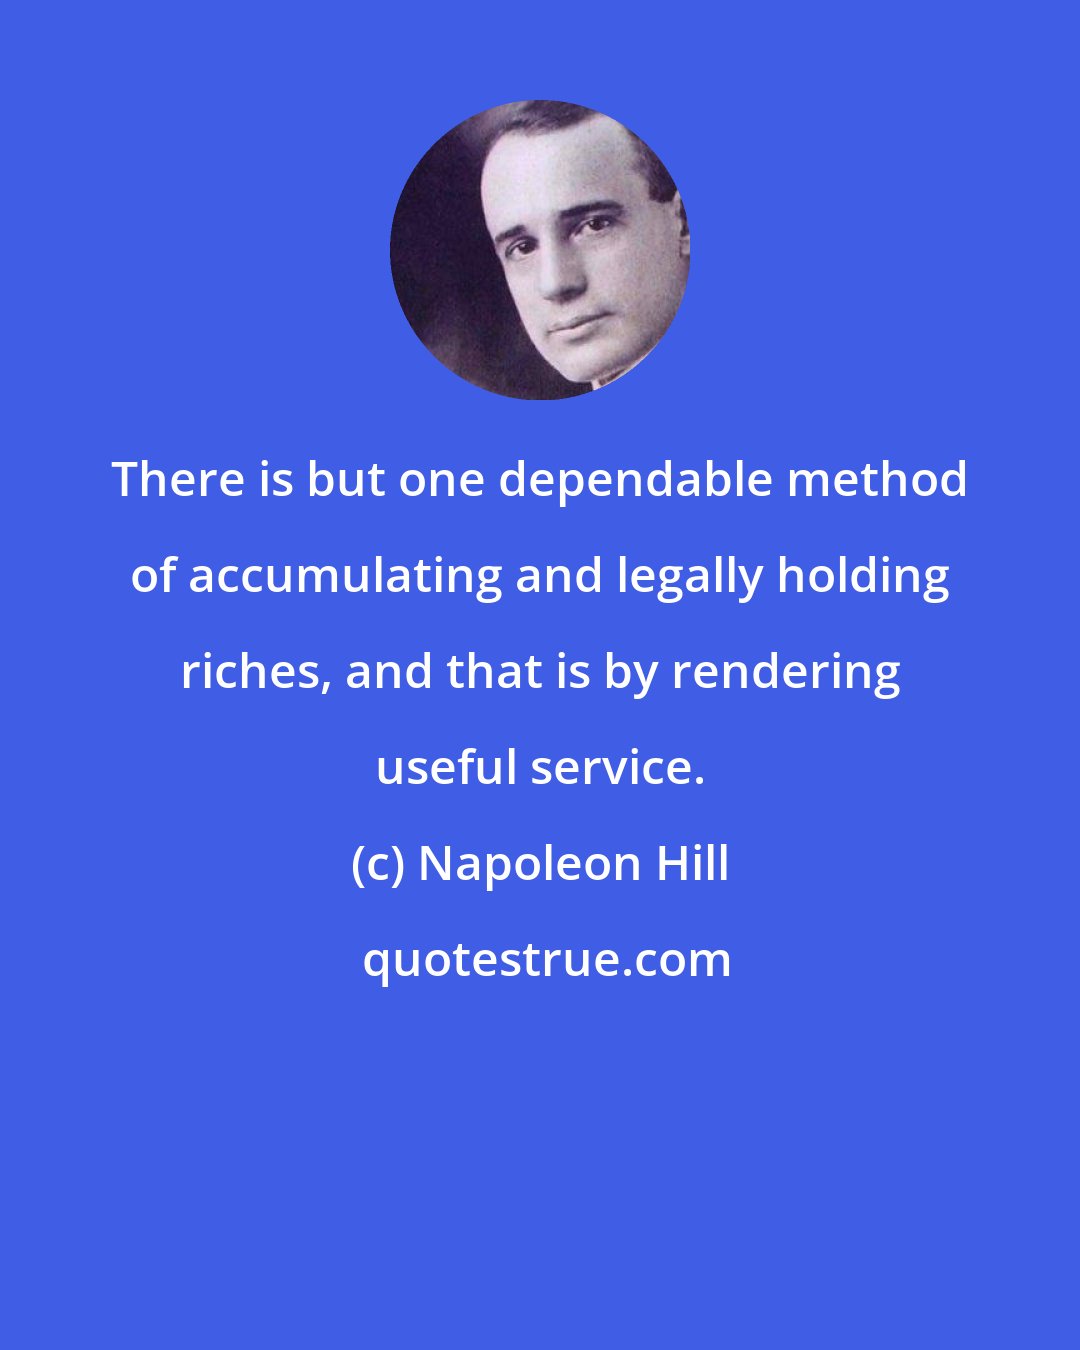 Napoleon Hill: There is but one dependable method of accumulating and legally holding riches, and that is by rendering useful service.